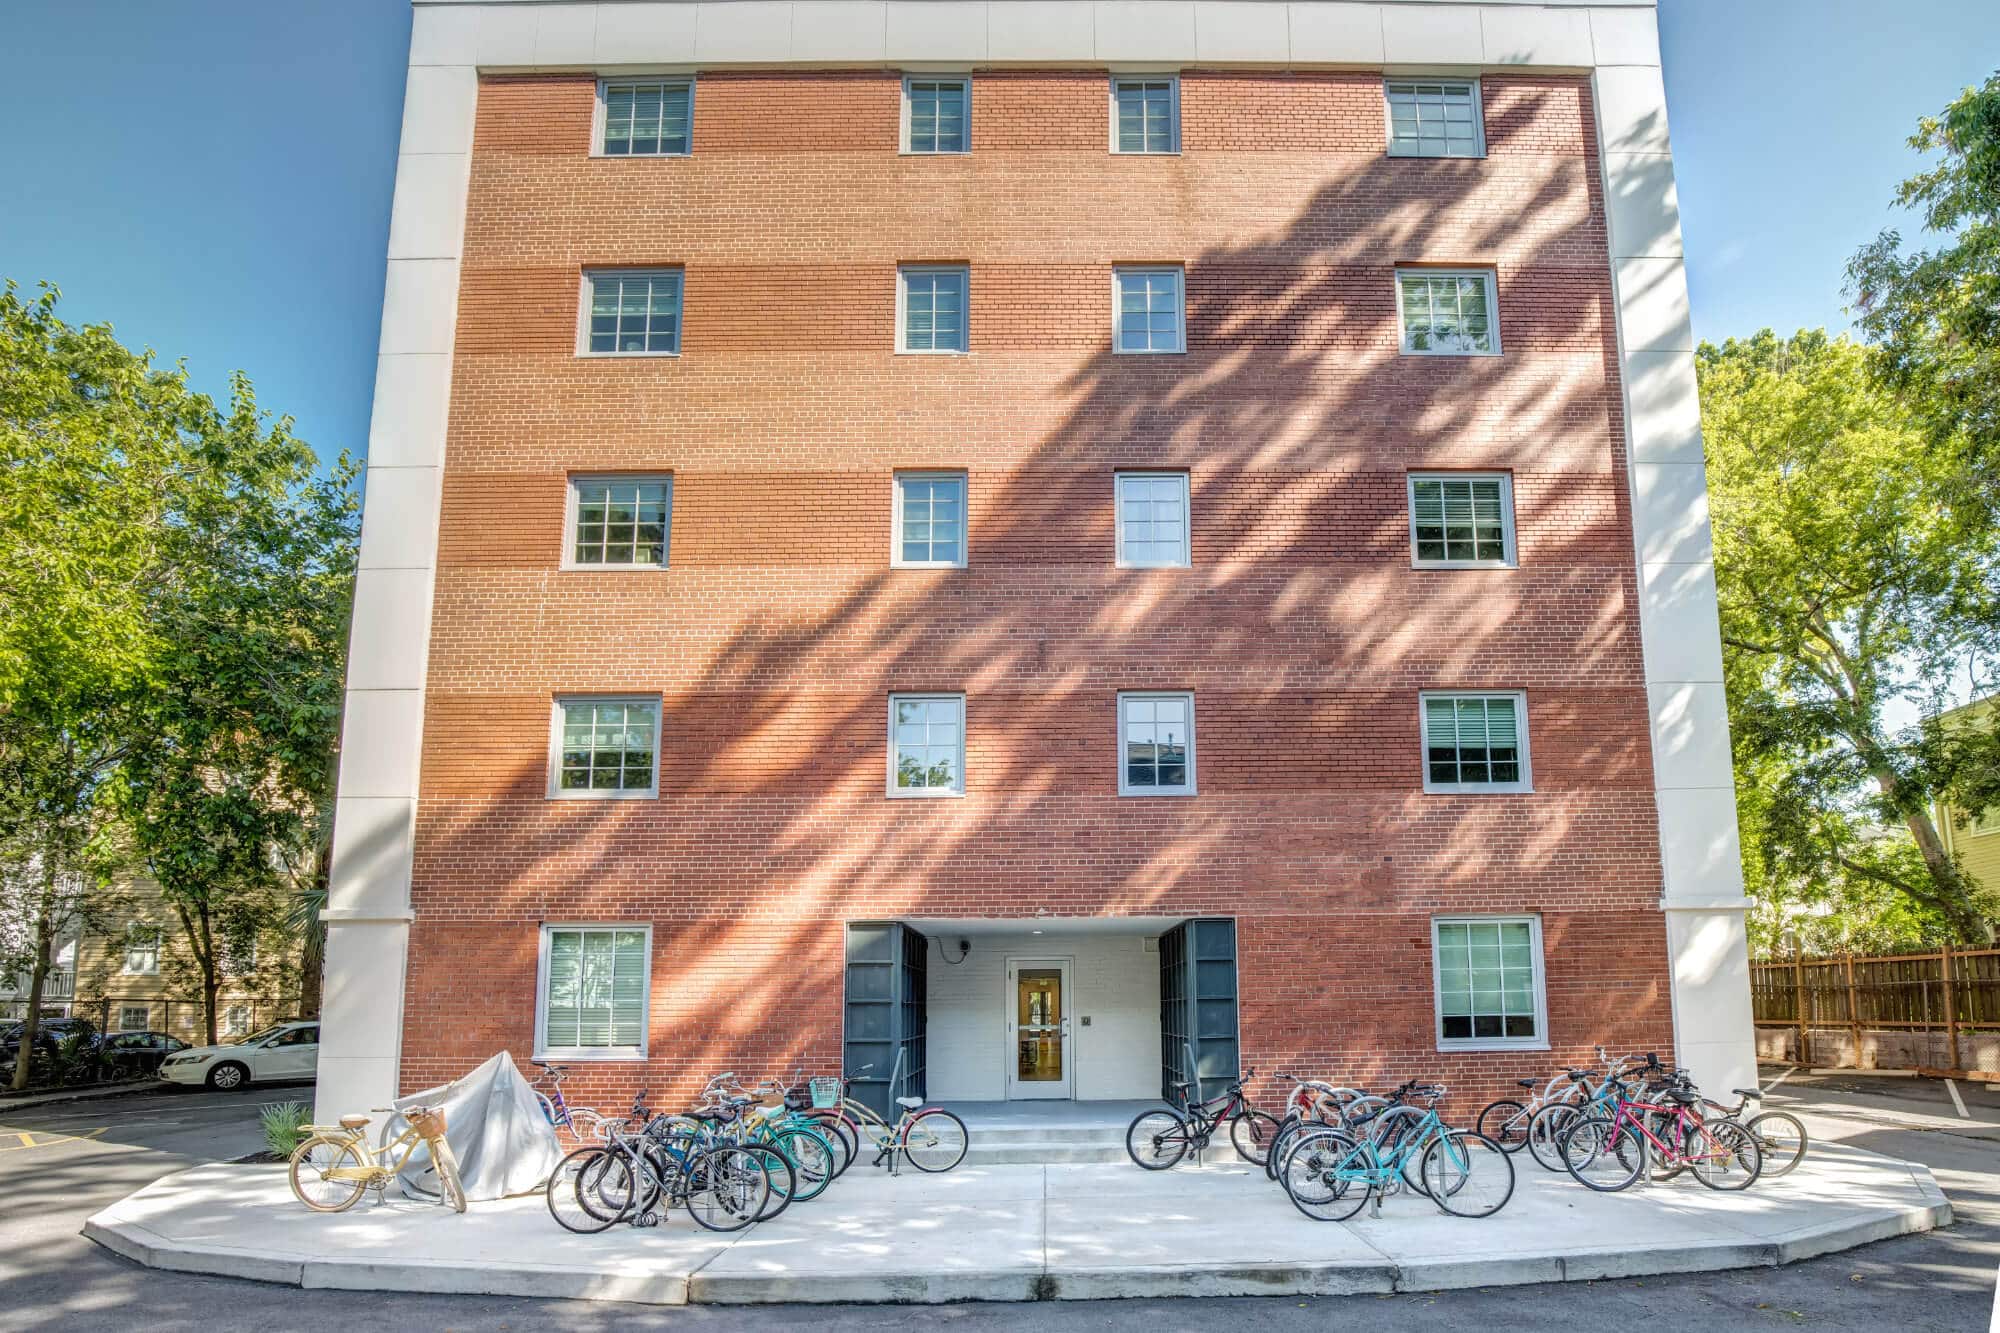 61 vandy off campus apartments near the college of charleston c of c building exterior back entrance bike storage